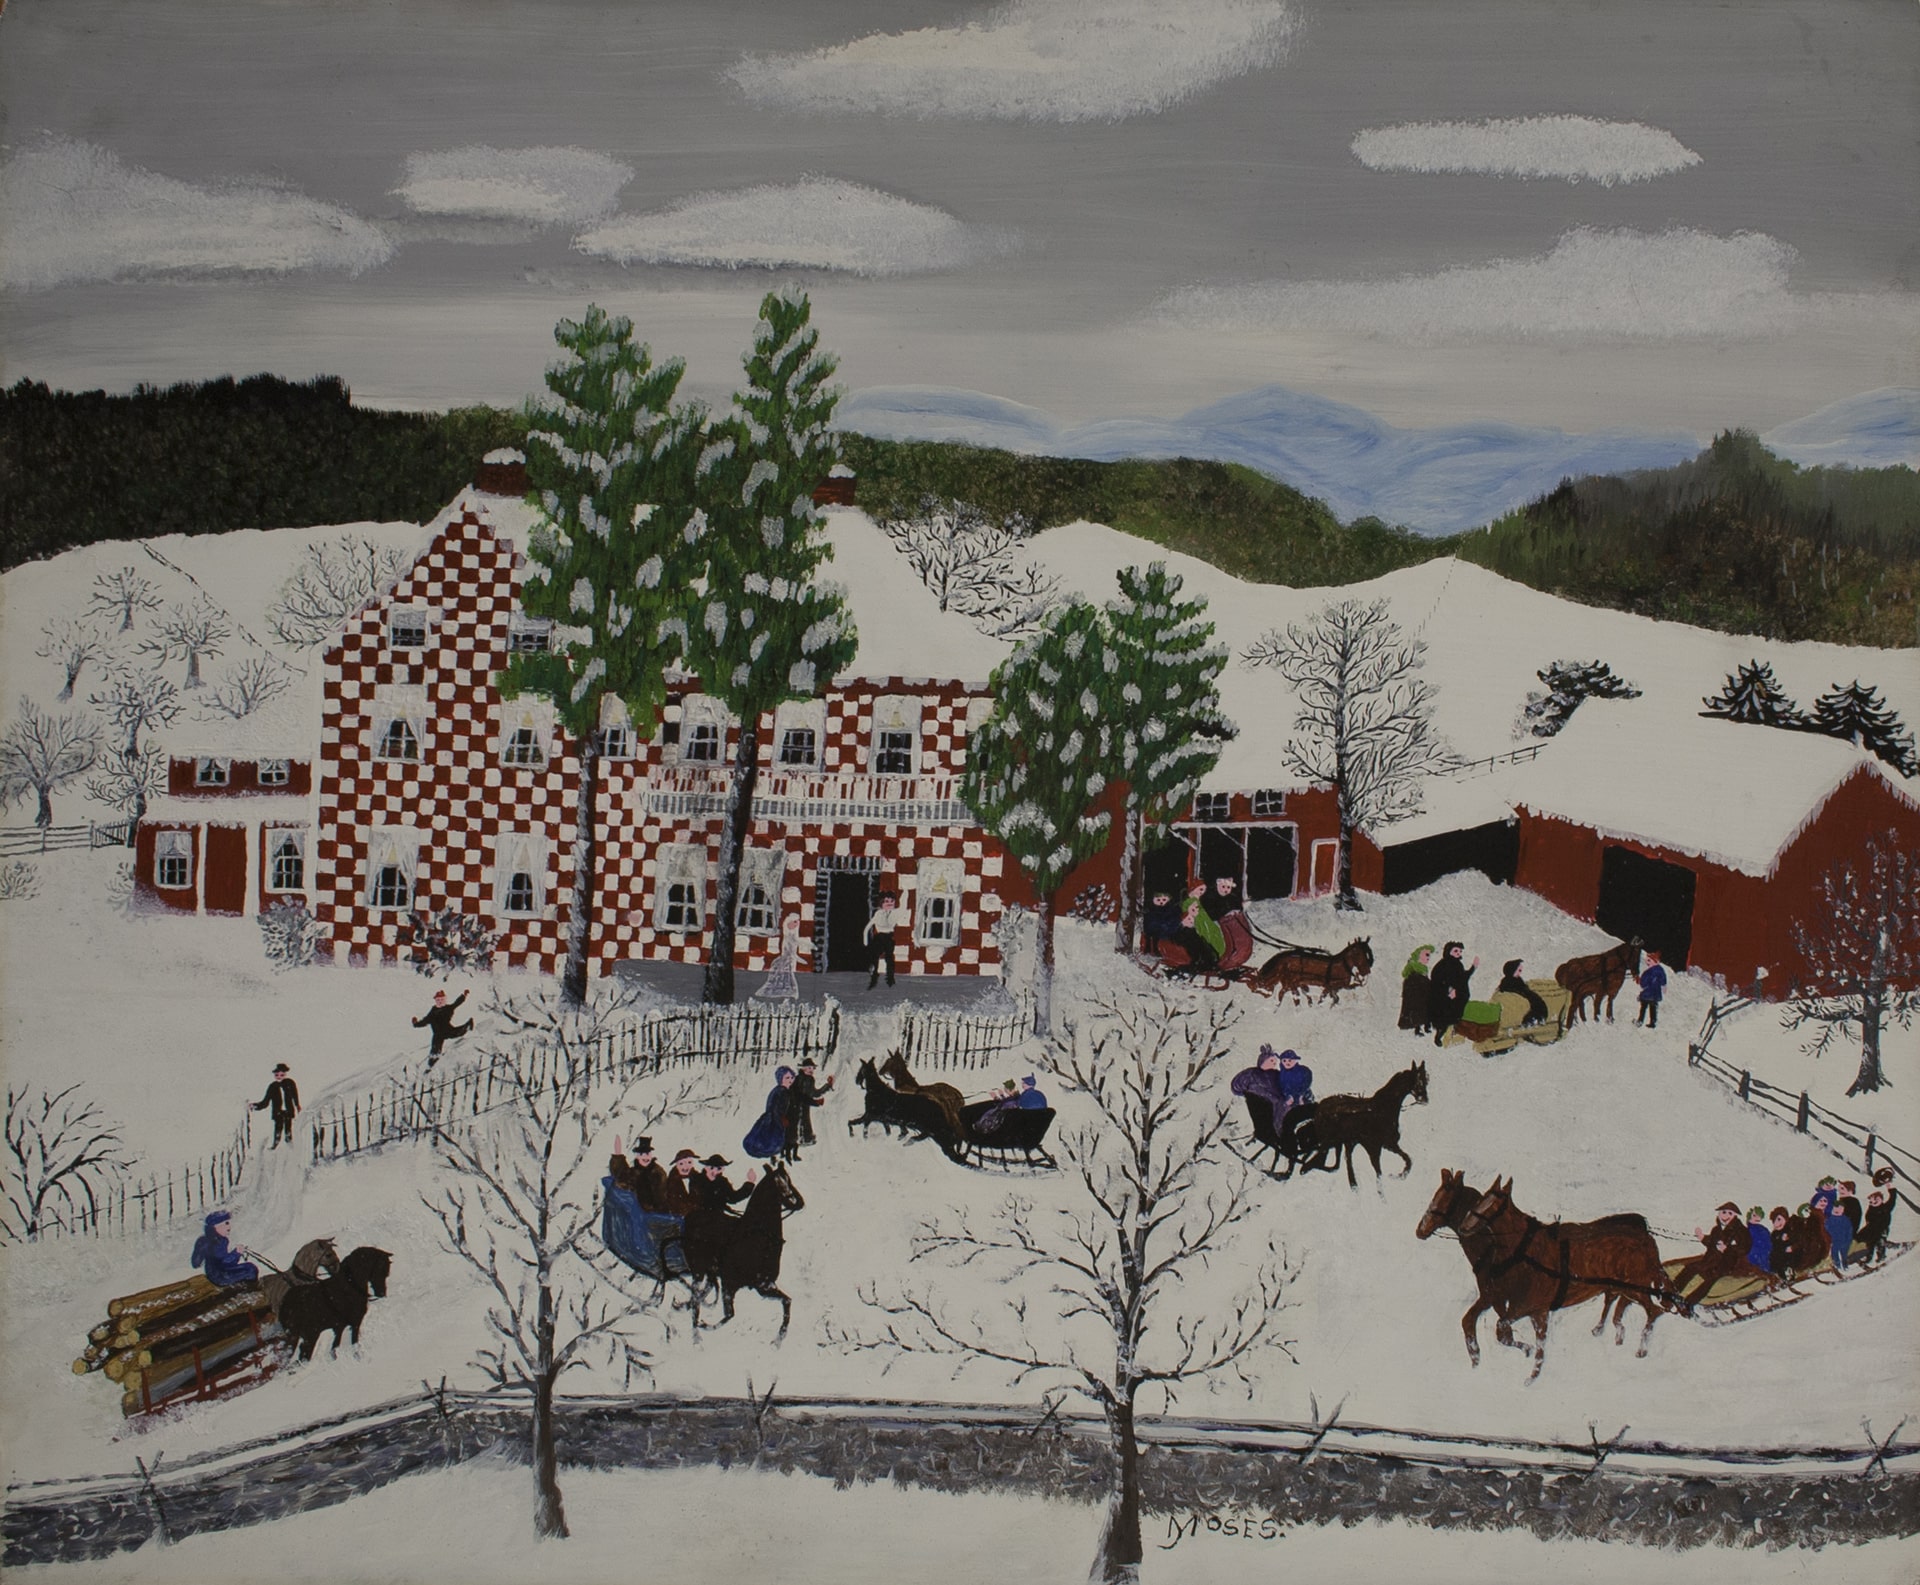 a painting of a winter scene with horse-drawn sleighs and a checkered house